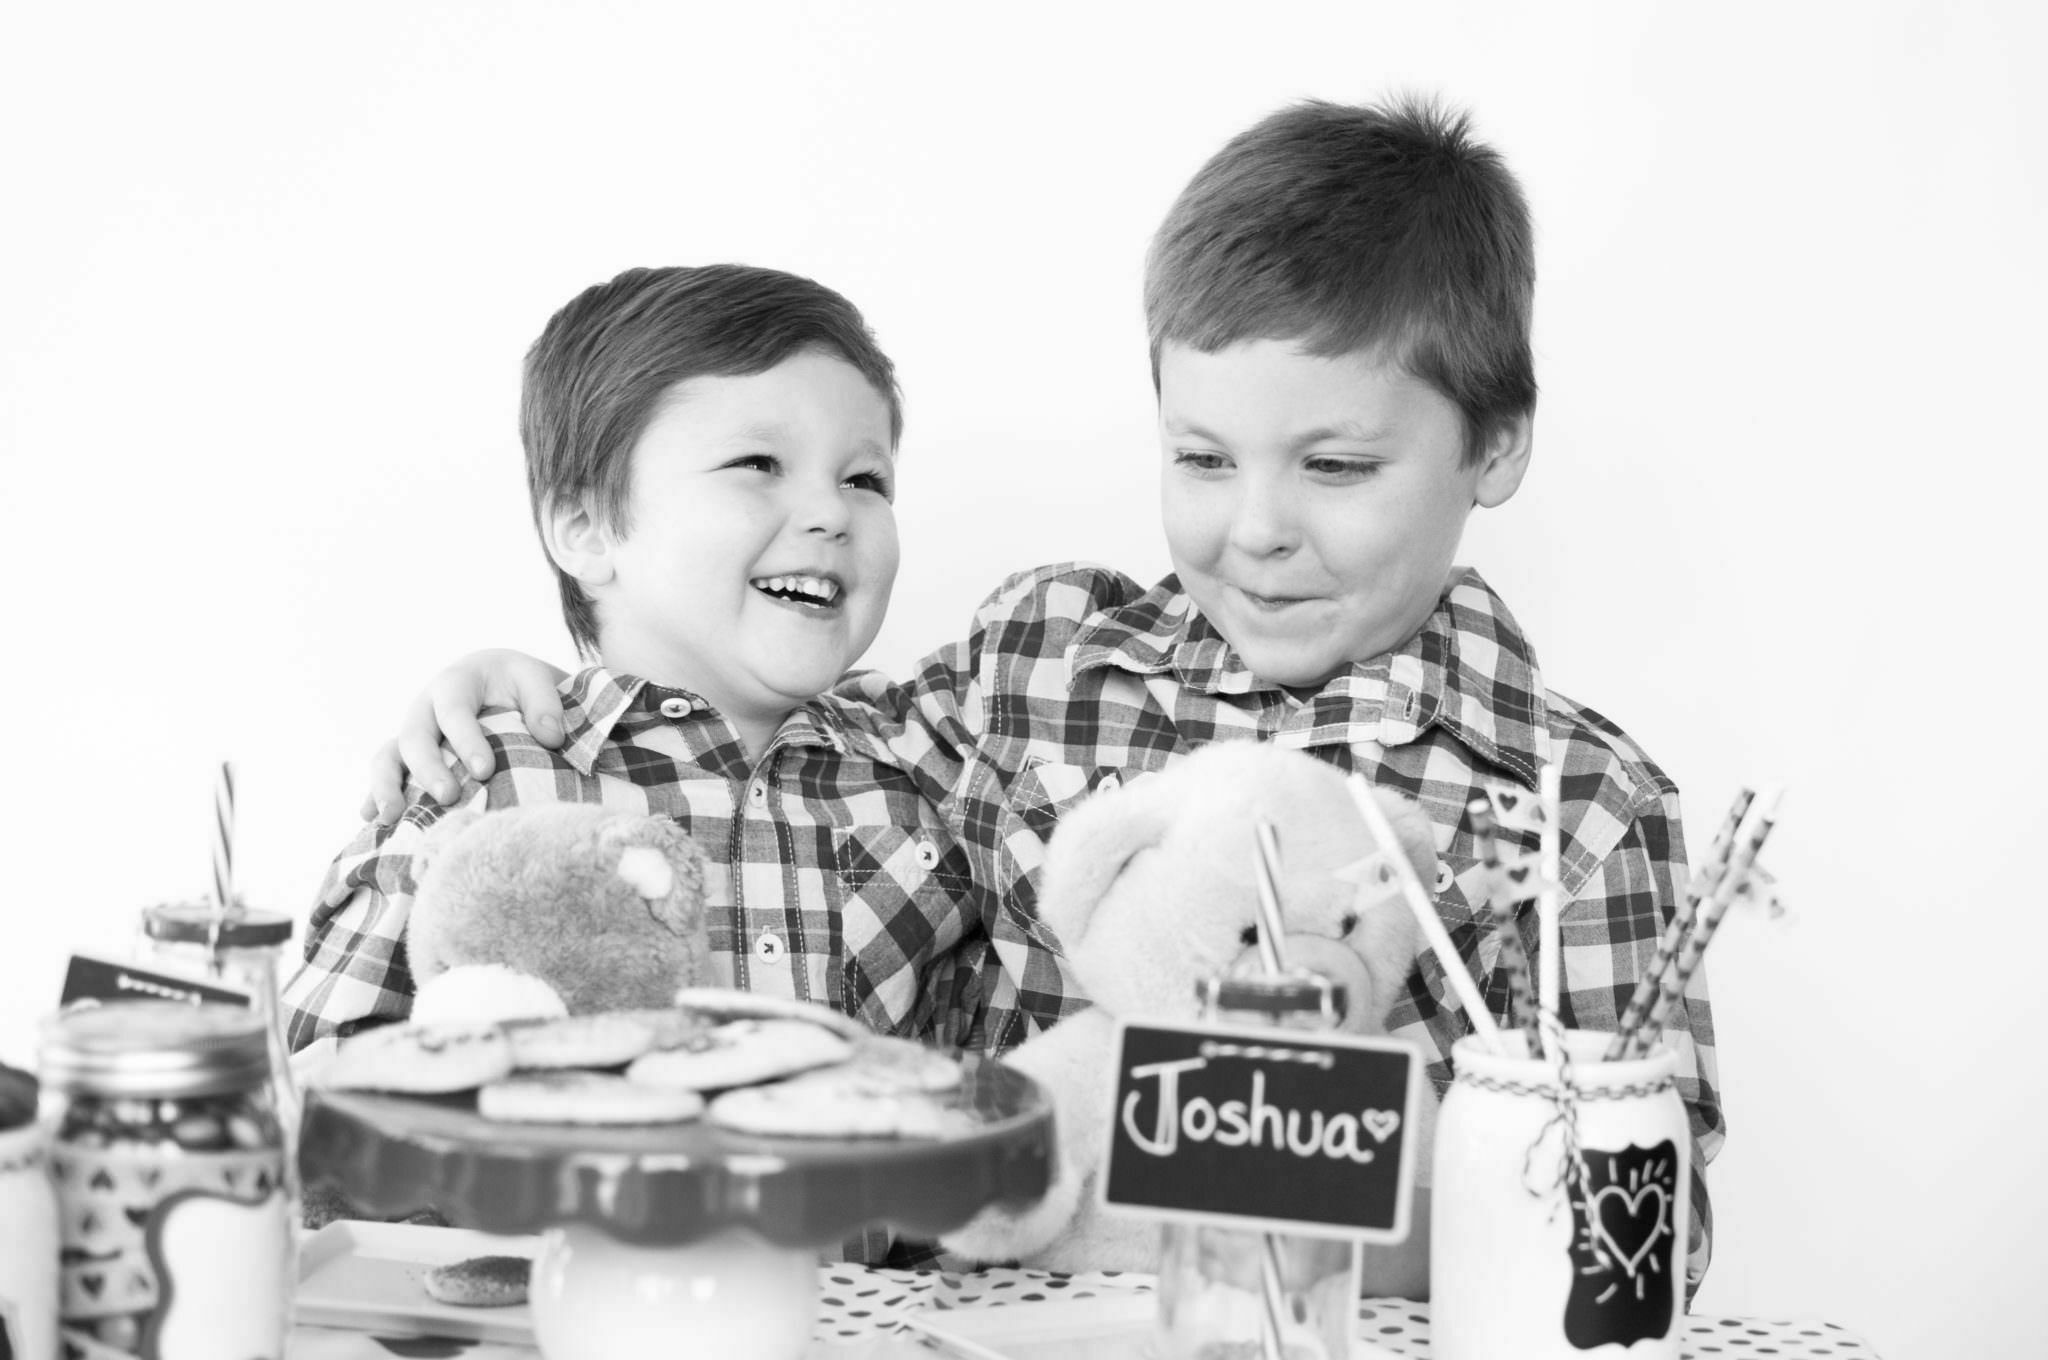 Brothers laughing at a party, Northville Child Photographer